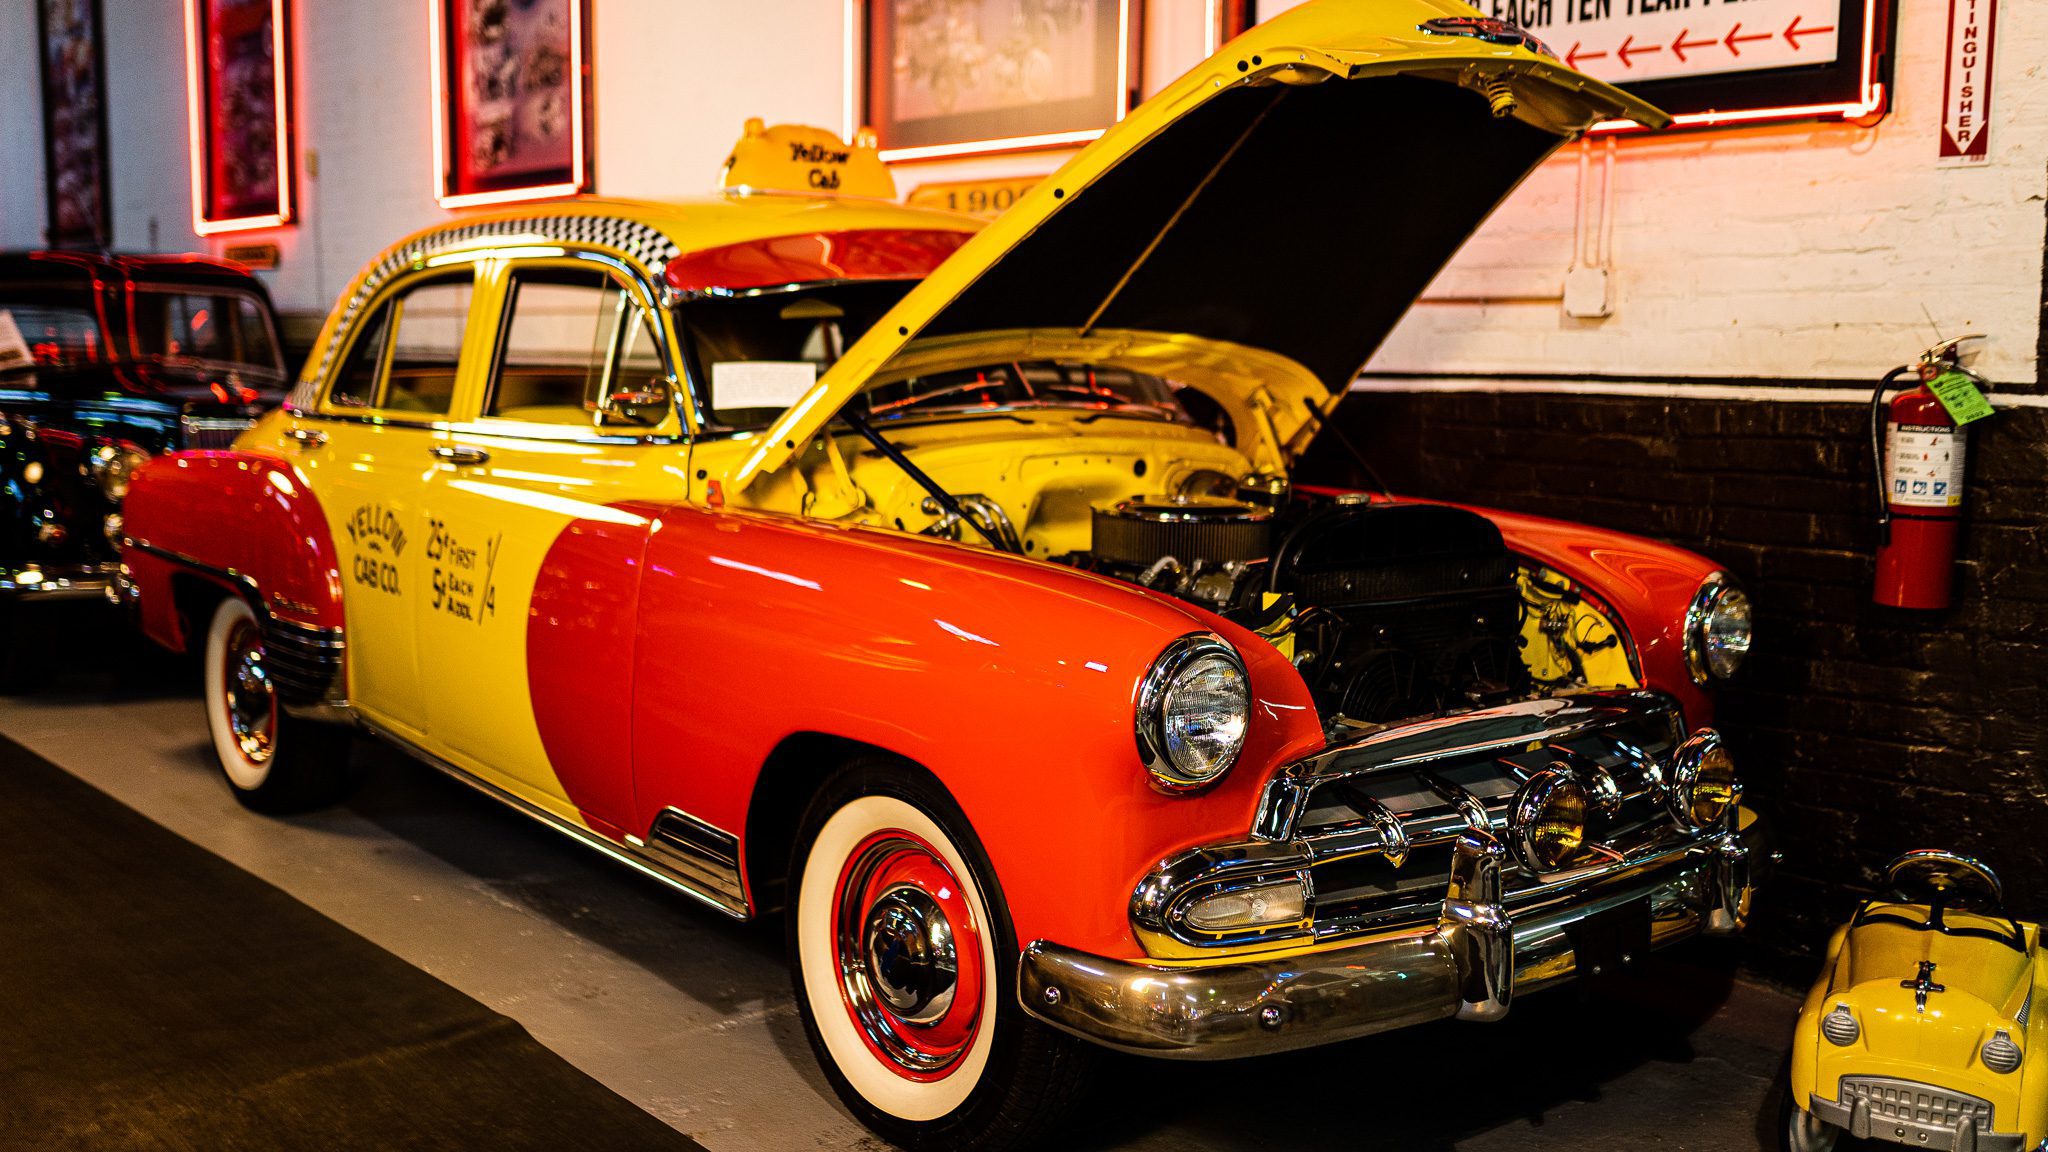 Red and Yellow Cab at Retro Rides Experience at Navy Pier